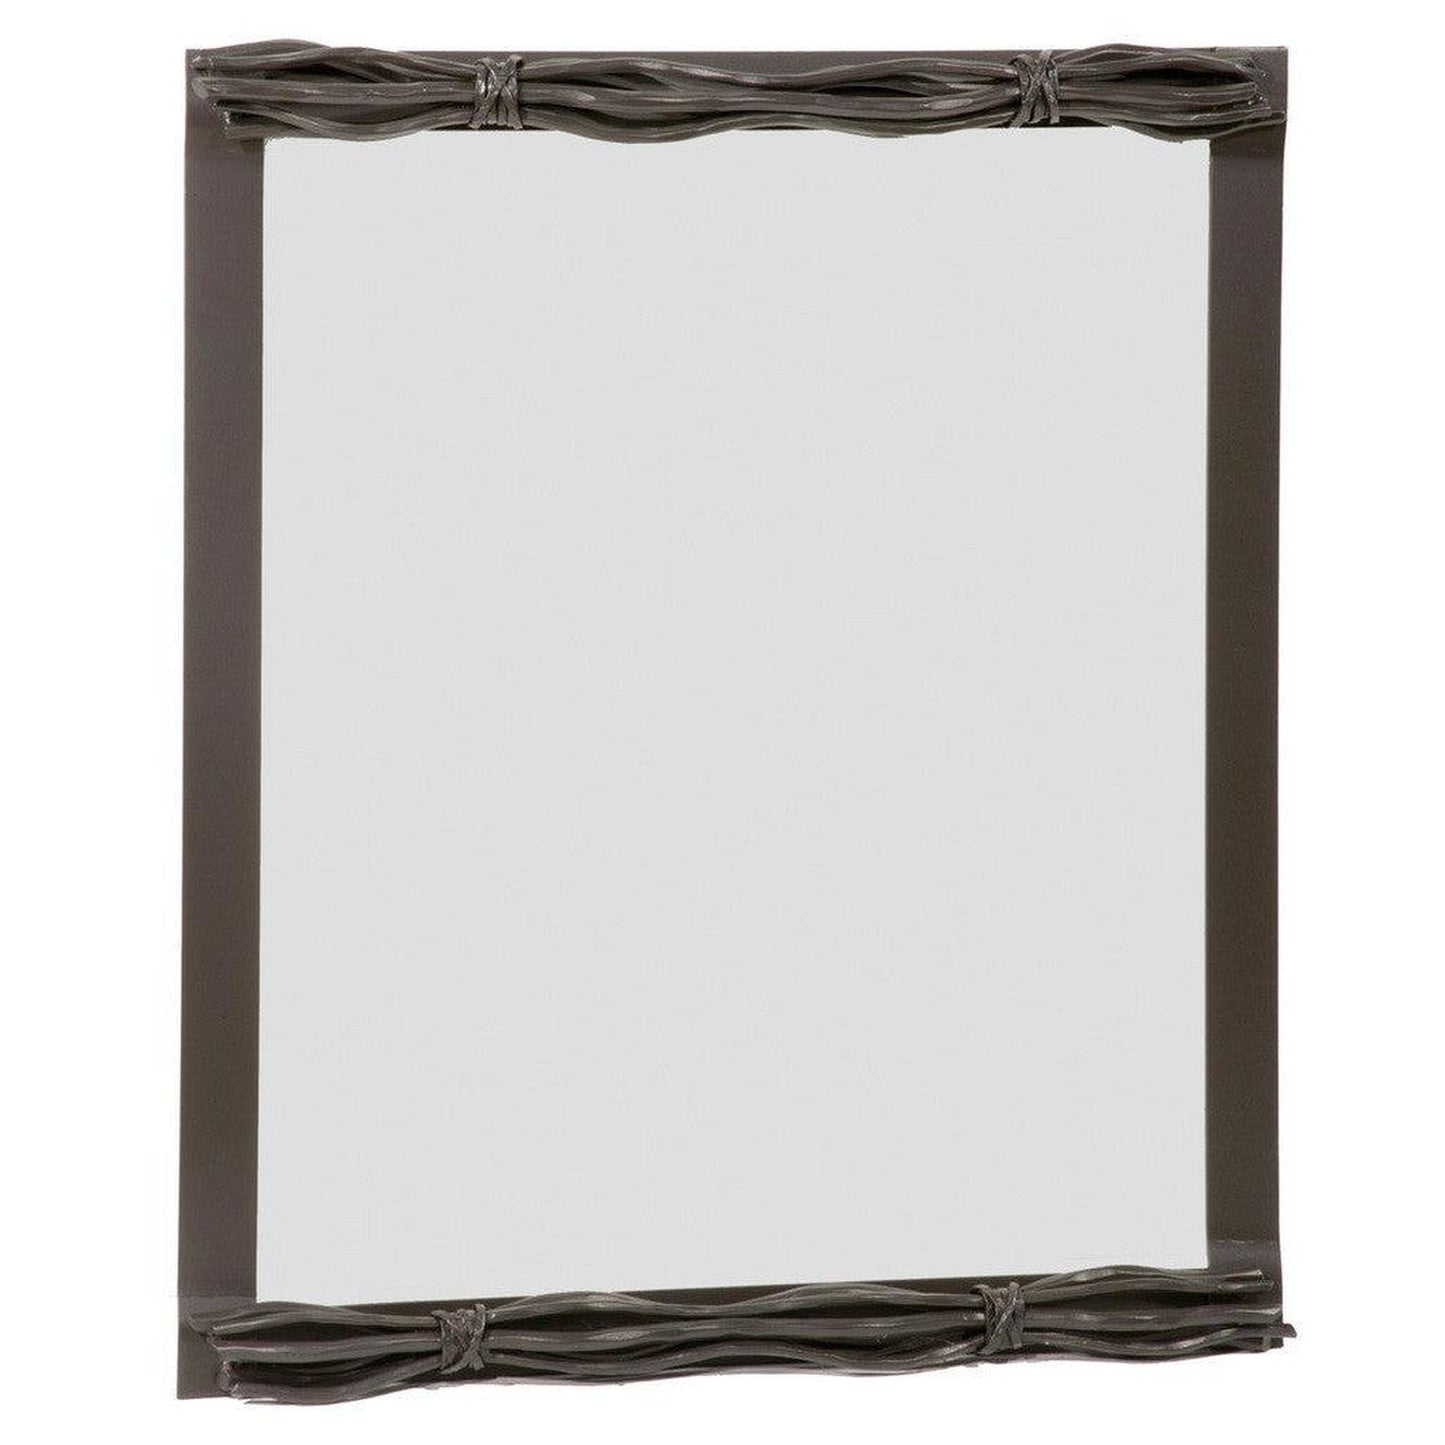 Stone County Ironworks Rush 21" x 26" Small Burnished Gold Iron Wall Mirror With Copper Iron Accent